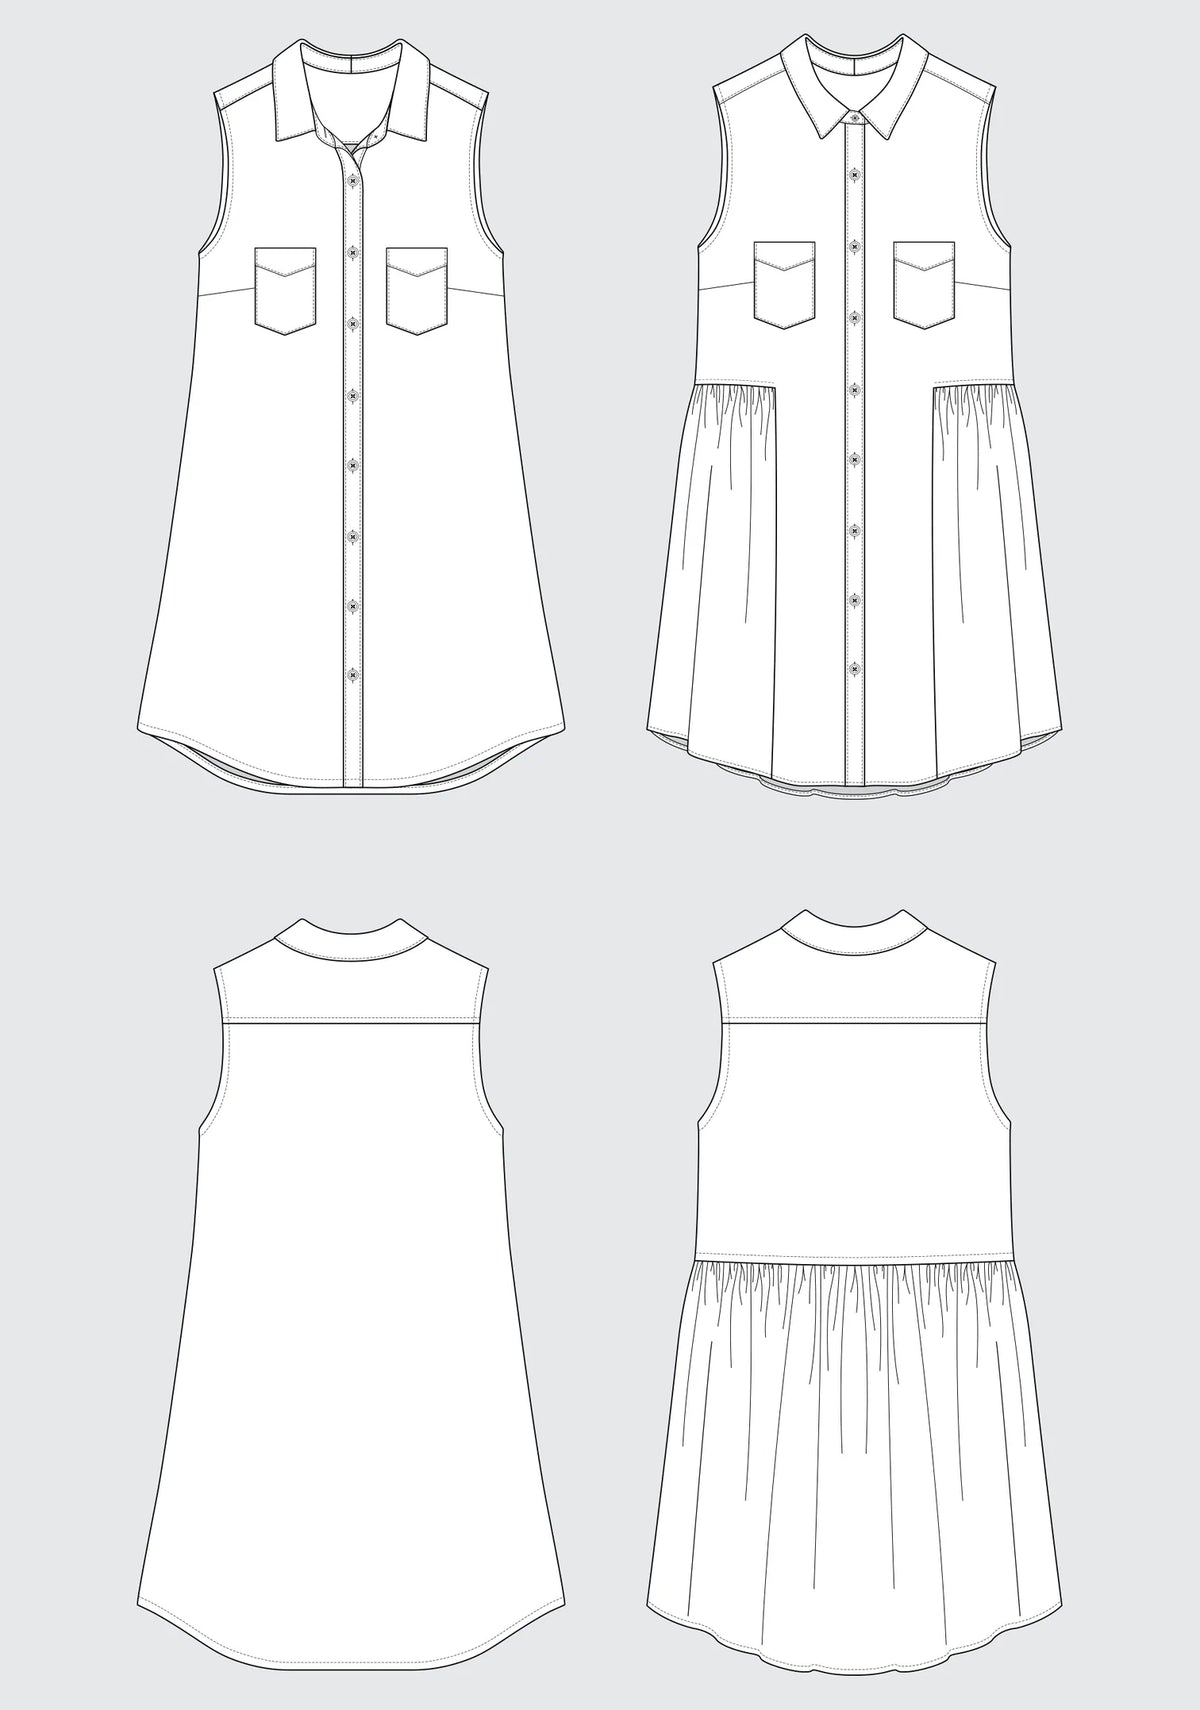 Design sketches of the Alder Shirtdress in View A and View B, front and back sides are shown. View B has gathered sides and back.